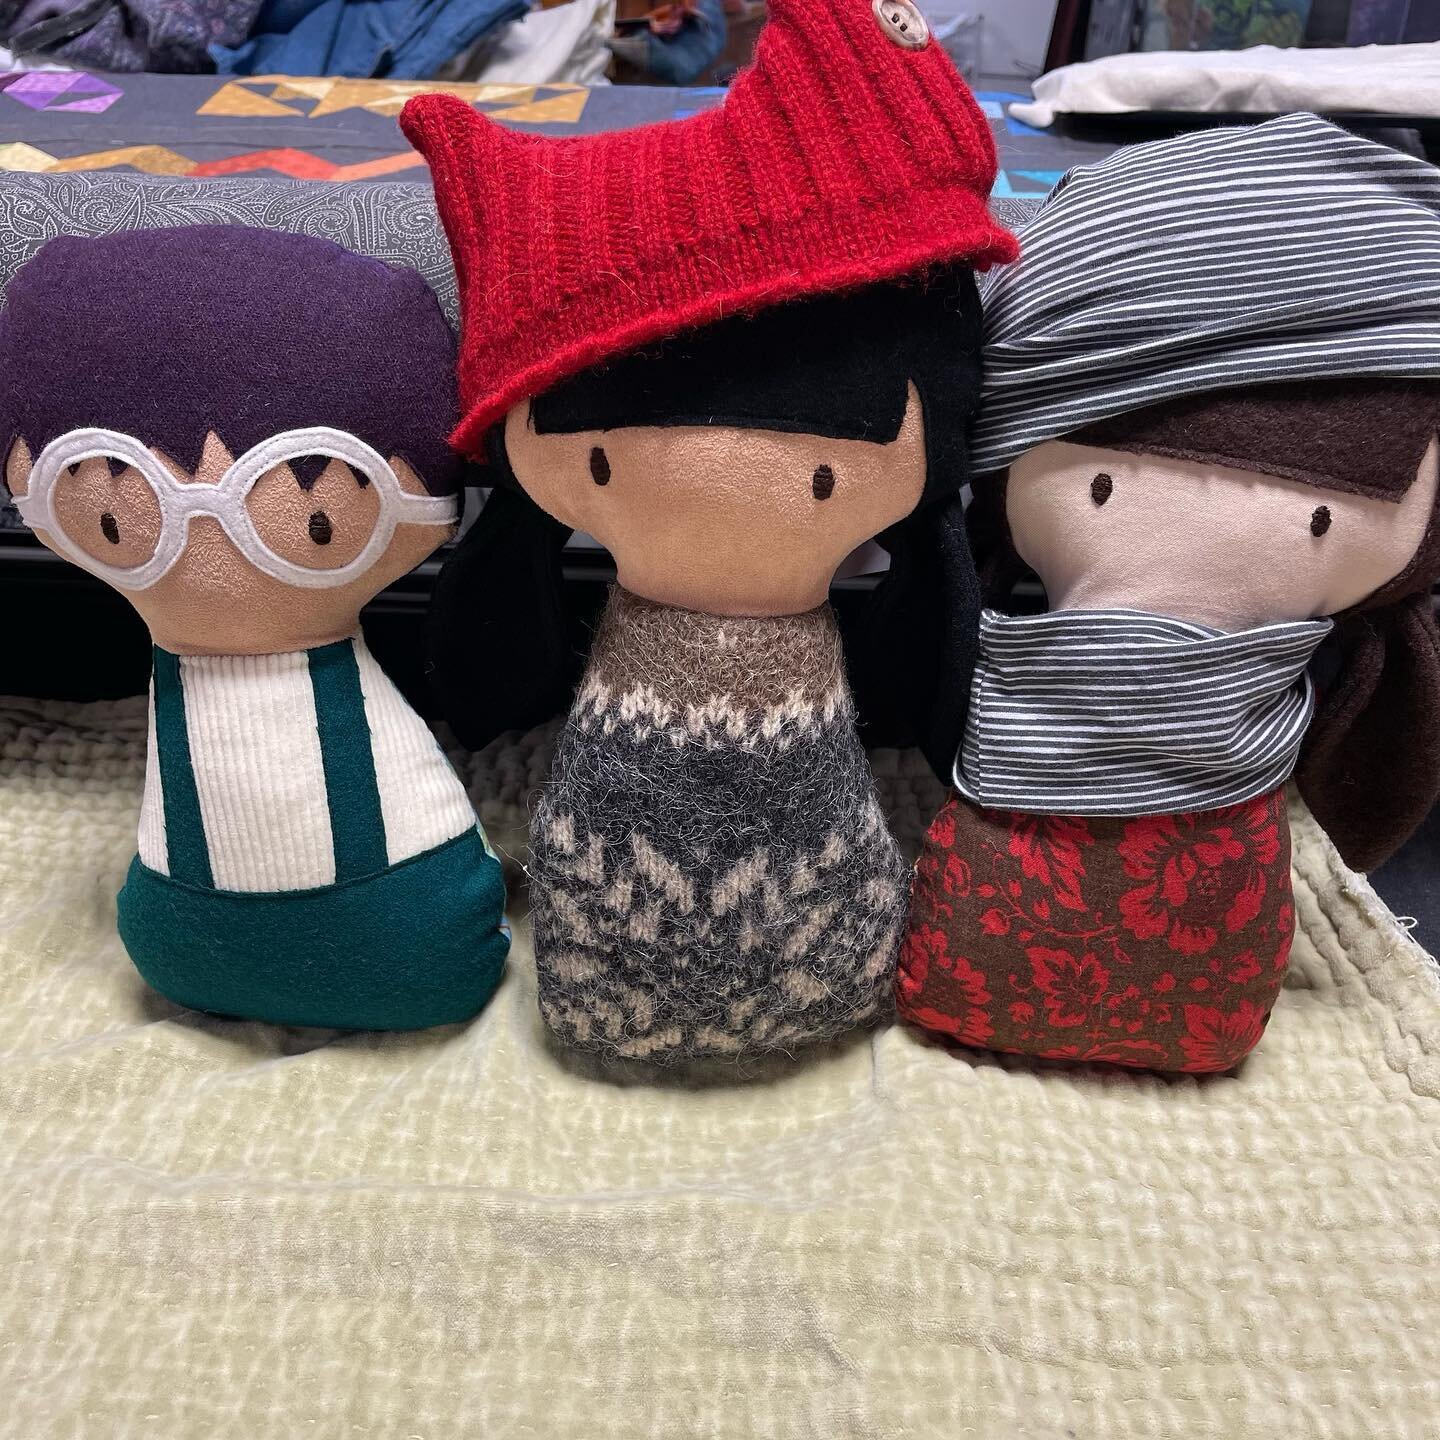 Six dolls made exclusively for @thelittleredfarm.mom on the way to the farm shop today! 
#clothdollpattern #rusticdolls